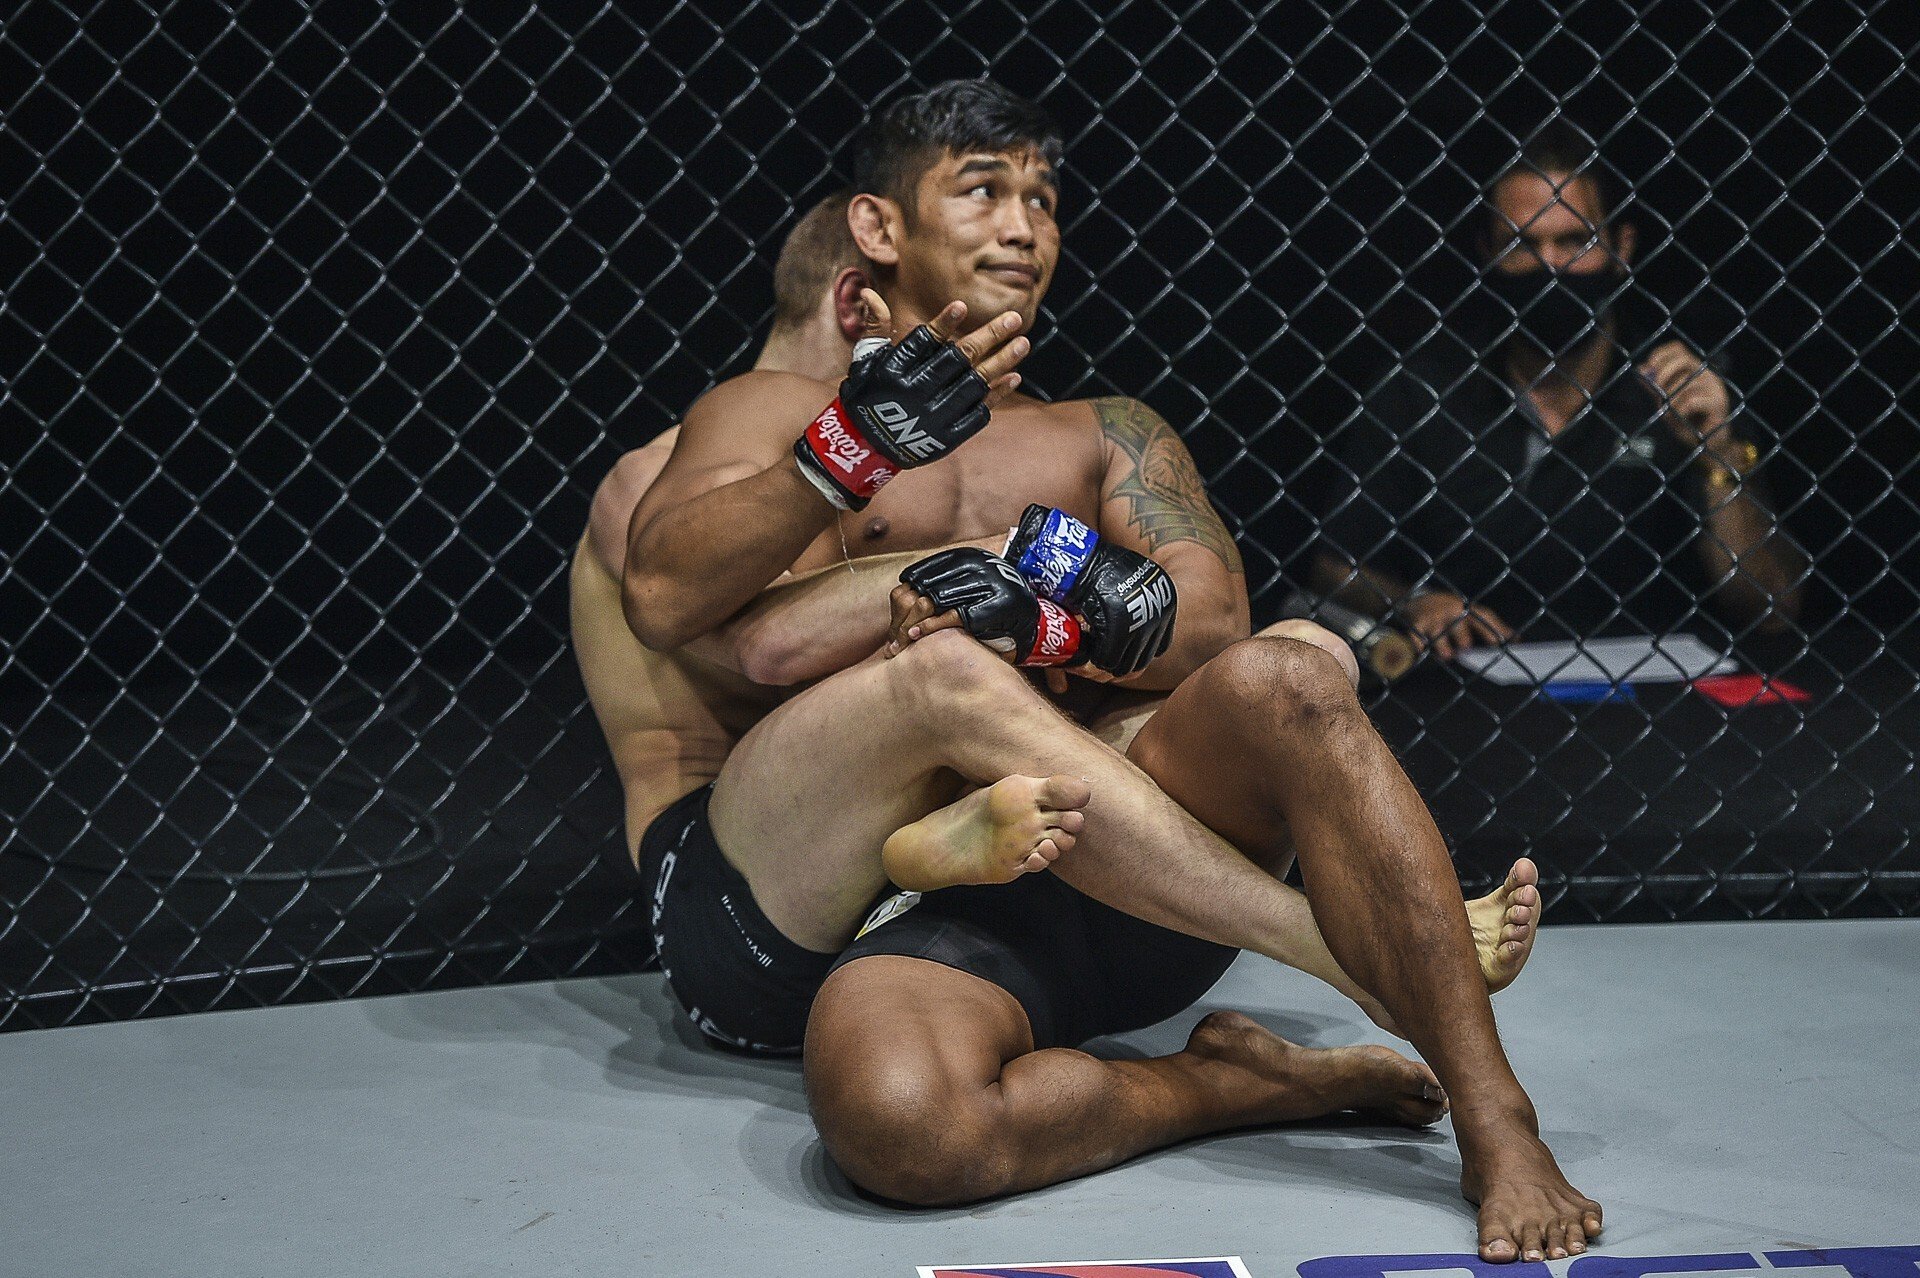 Aung La N Sang motions to the referee as Reinier De Ridder holds him at ONE: Inside The Matrix. Photo: ONE Championship